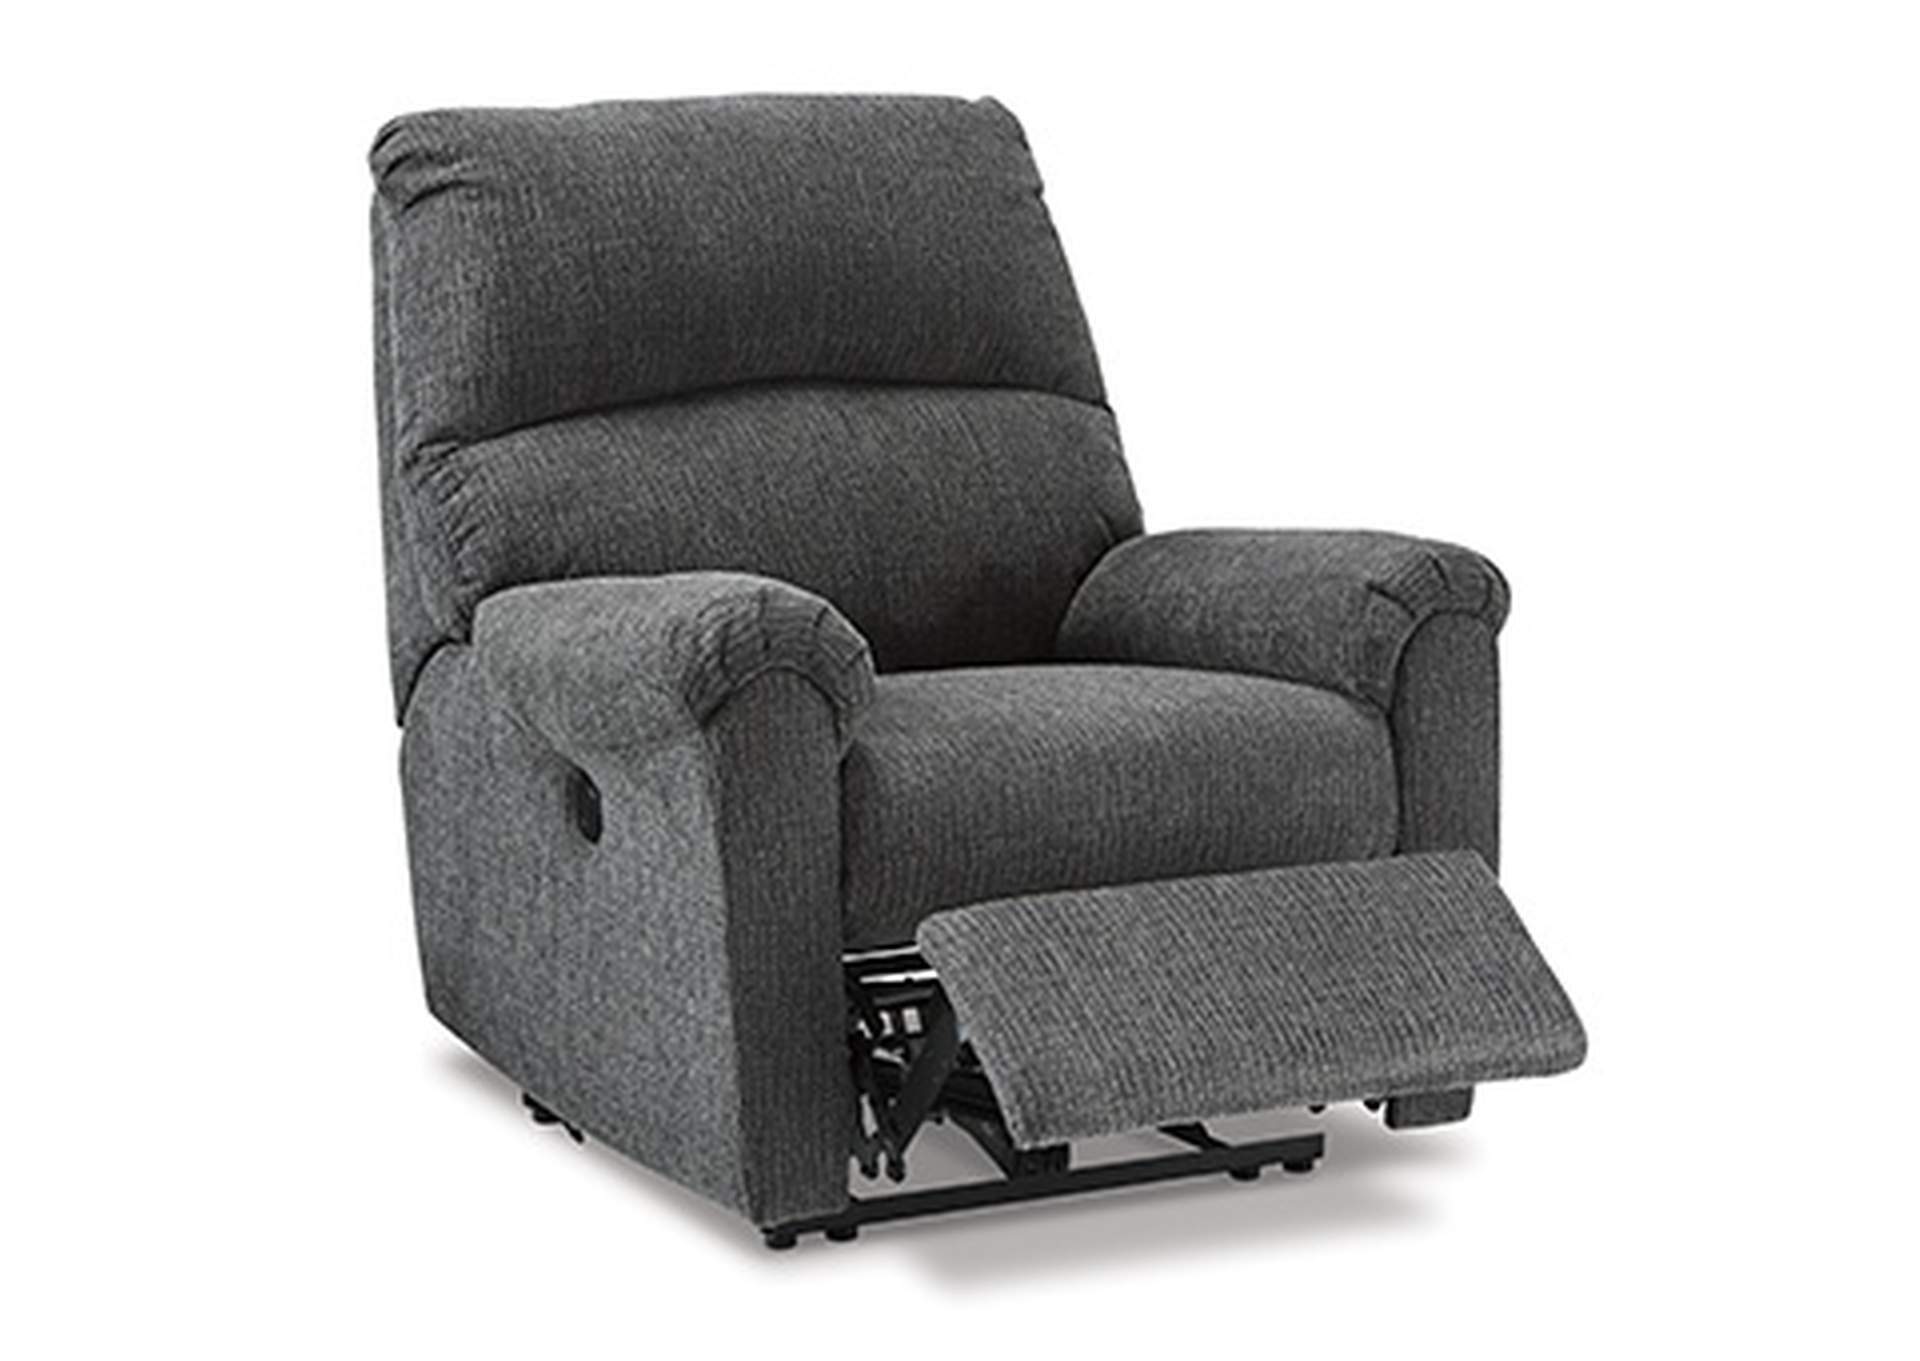 McTeer Power Recliner,Signature Design By Ashley